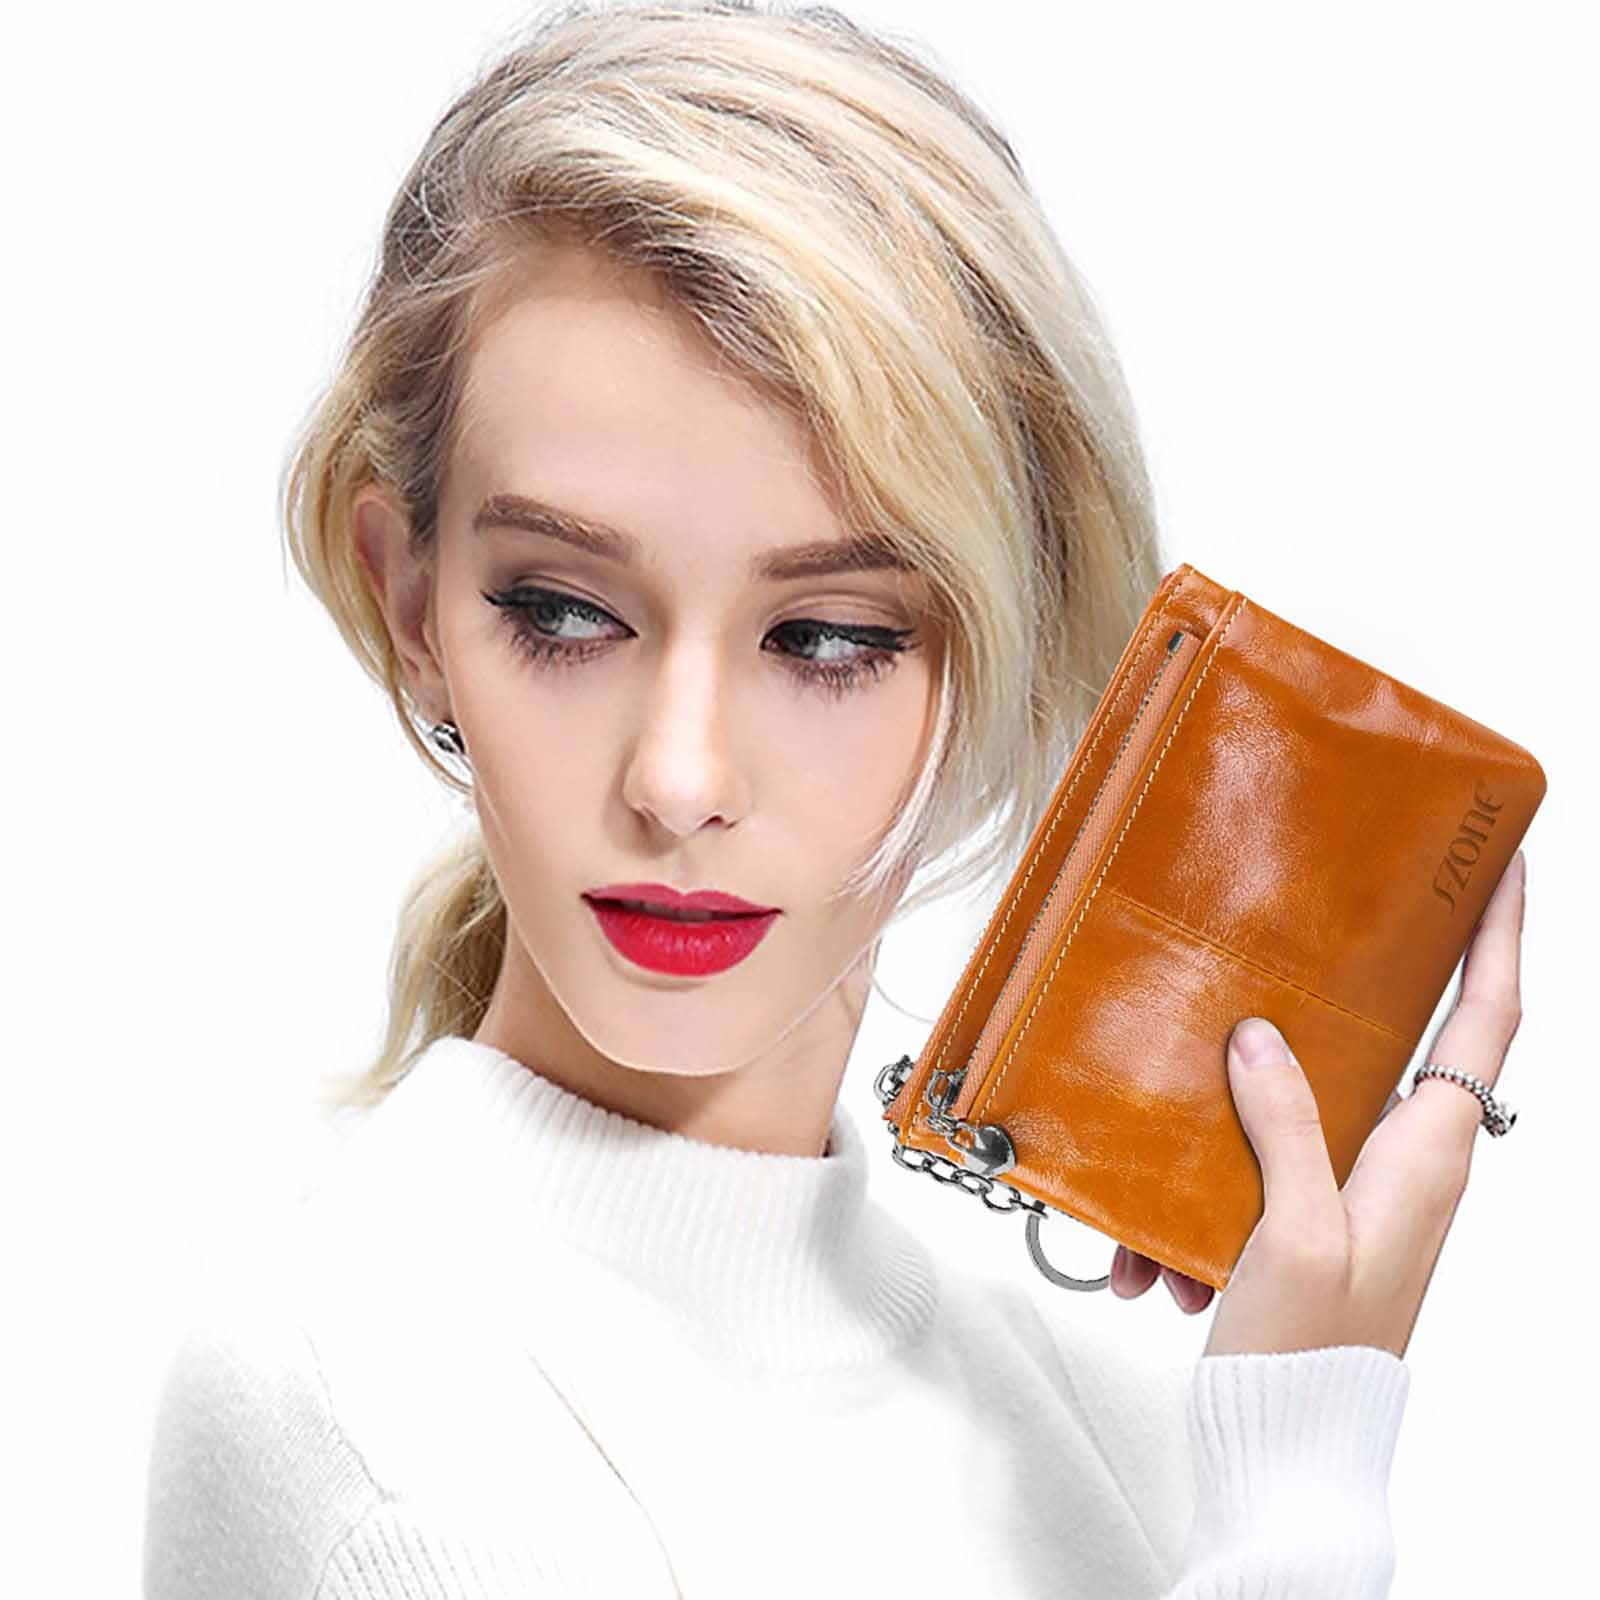 WAX COWHIDE LEATHER WALLET